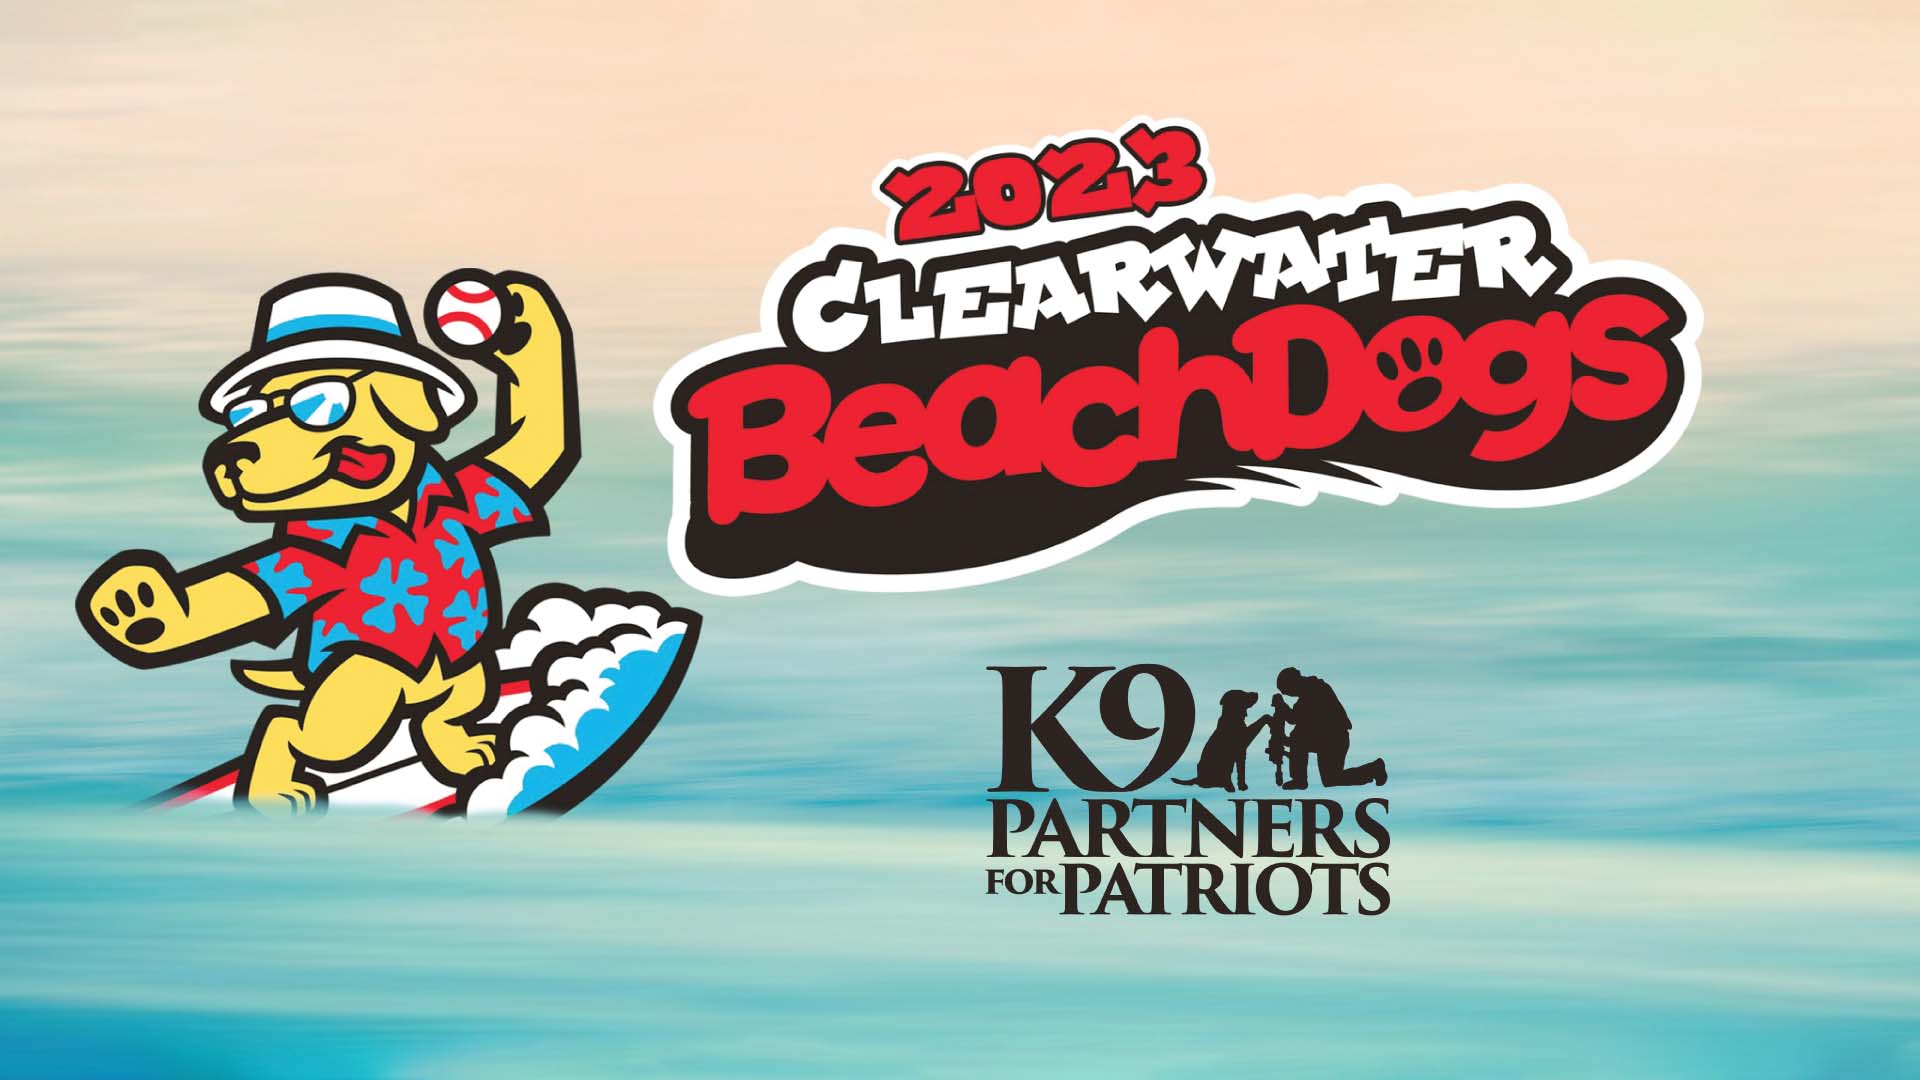 Clearwater Beach Dogs